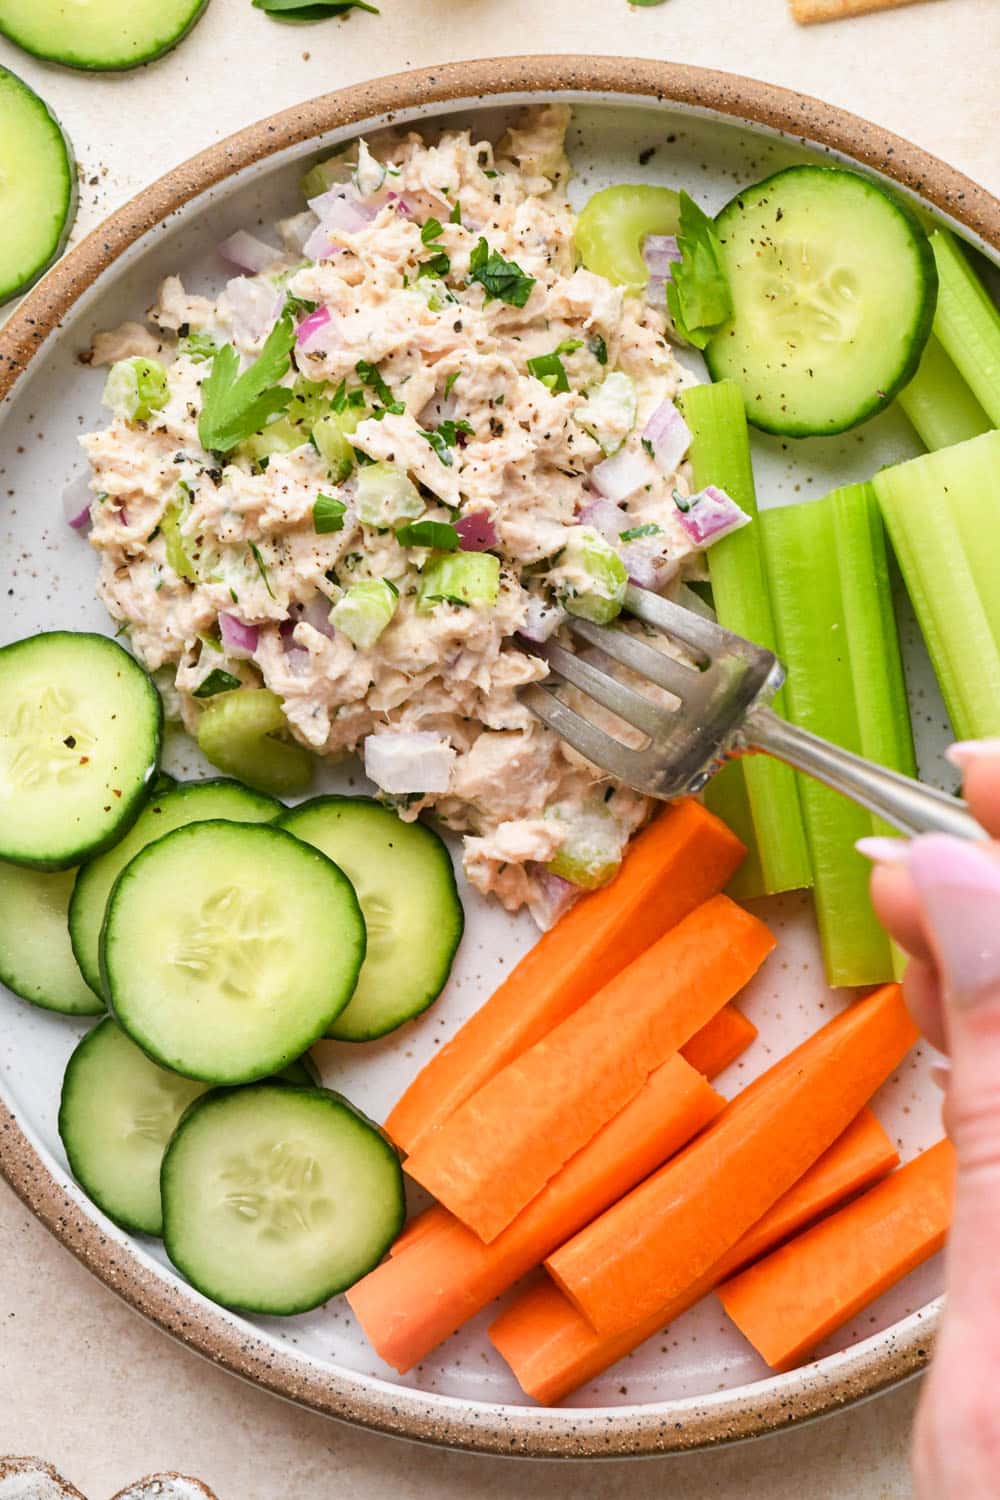 A scoop of healthy tuna salad on a plate with cut veggies and a fork digging into the tuna salad.